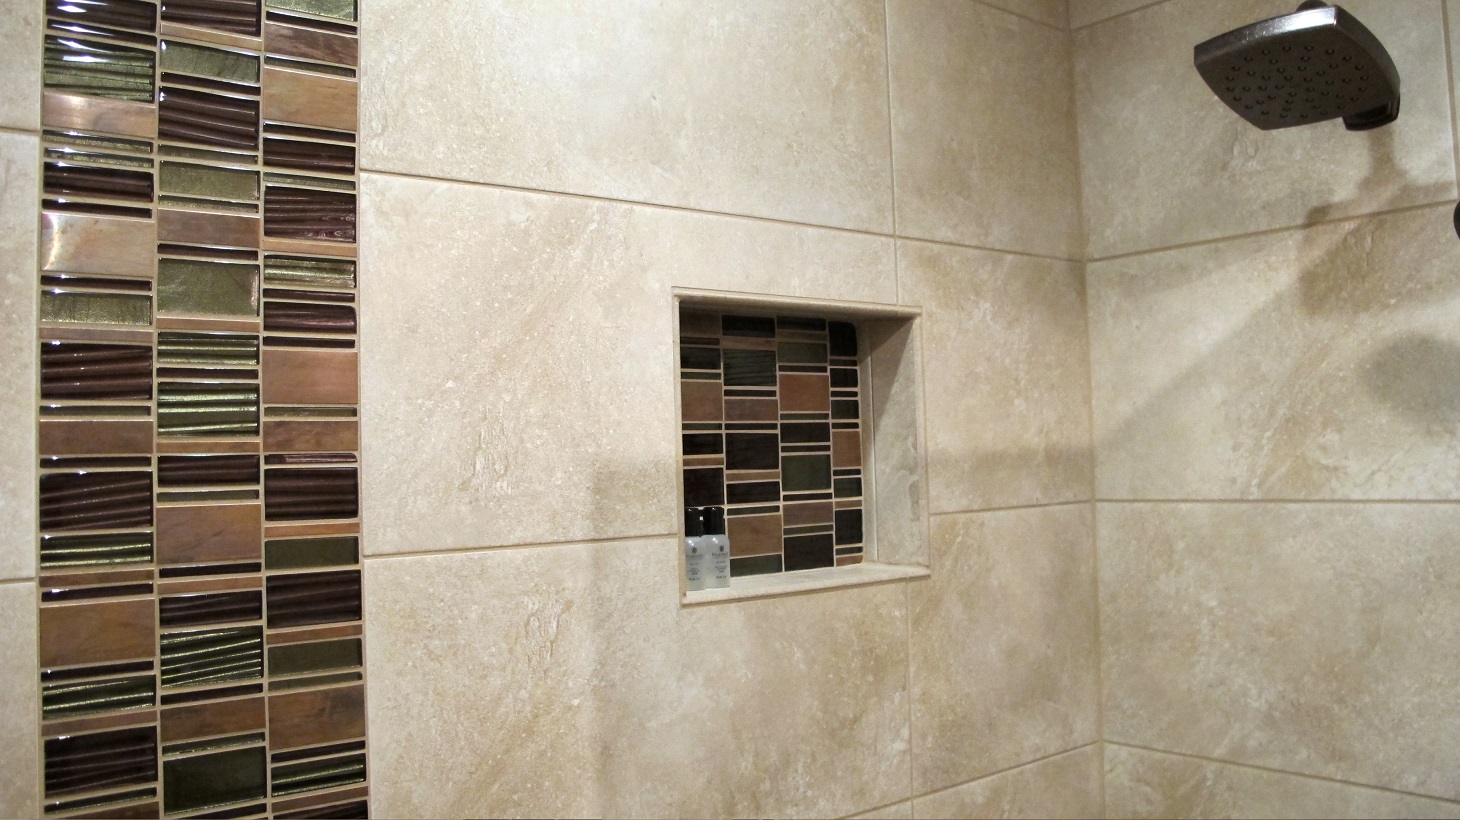 guest bathroom walk in shower shower pony wall glass stainless mosaic tile plank 6x36 Daltile Acacia Valley Ridge Kensington Beige Glazio Corrugated Series Ginger Clove